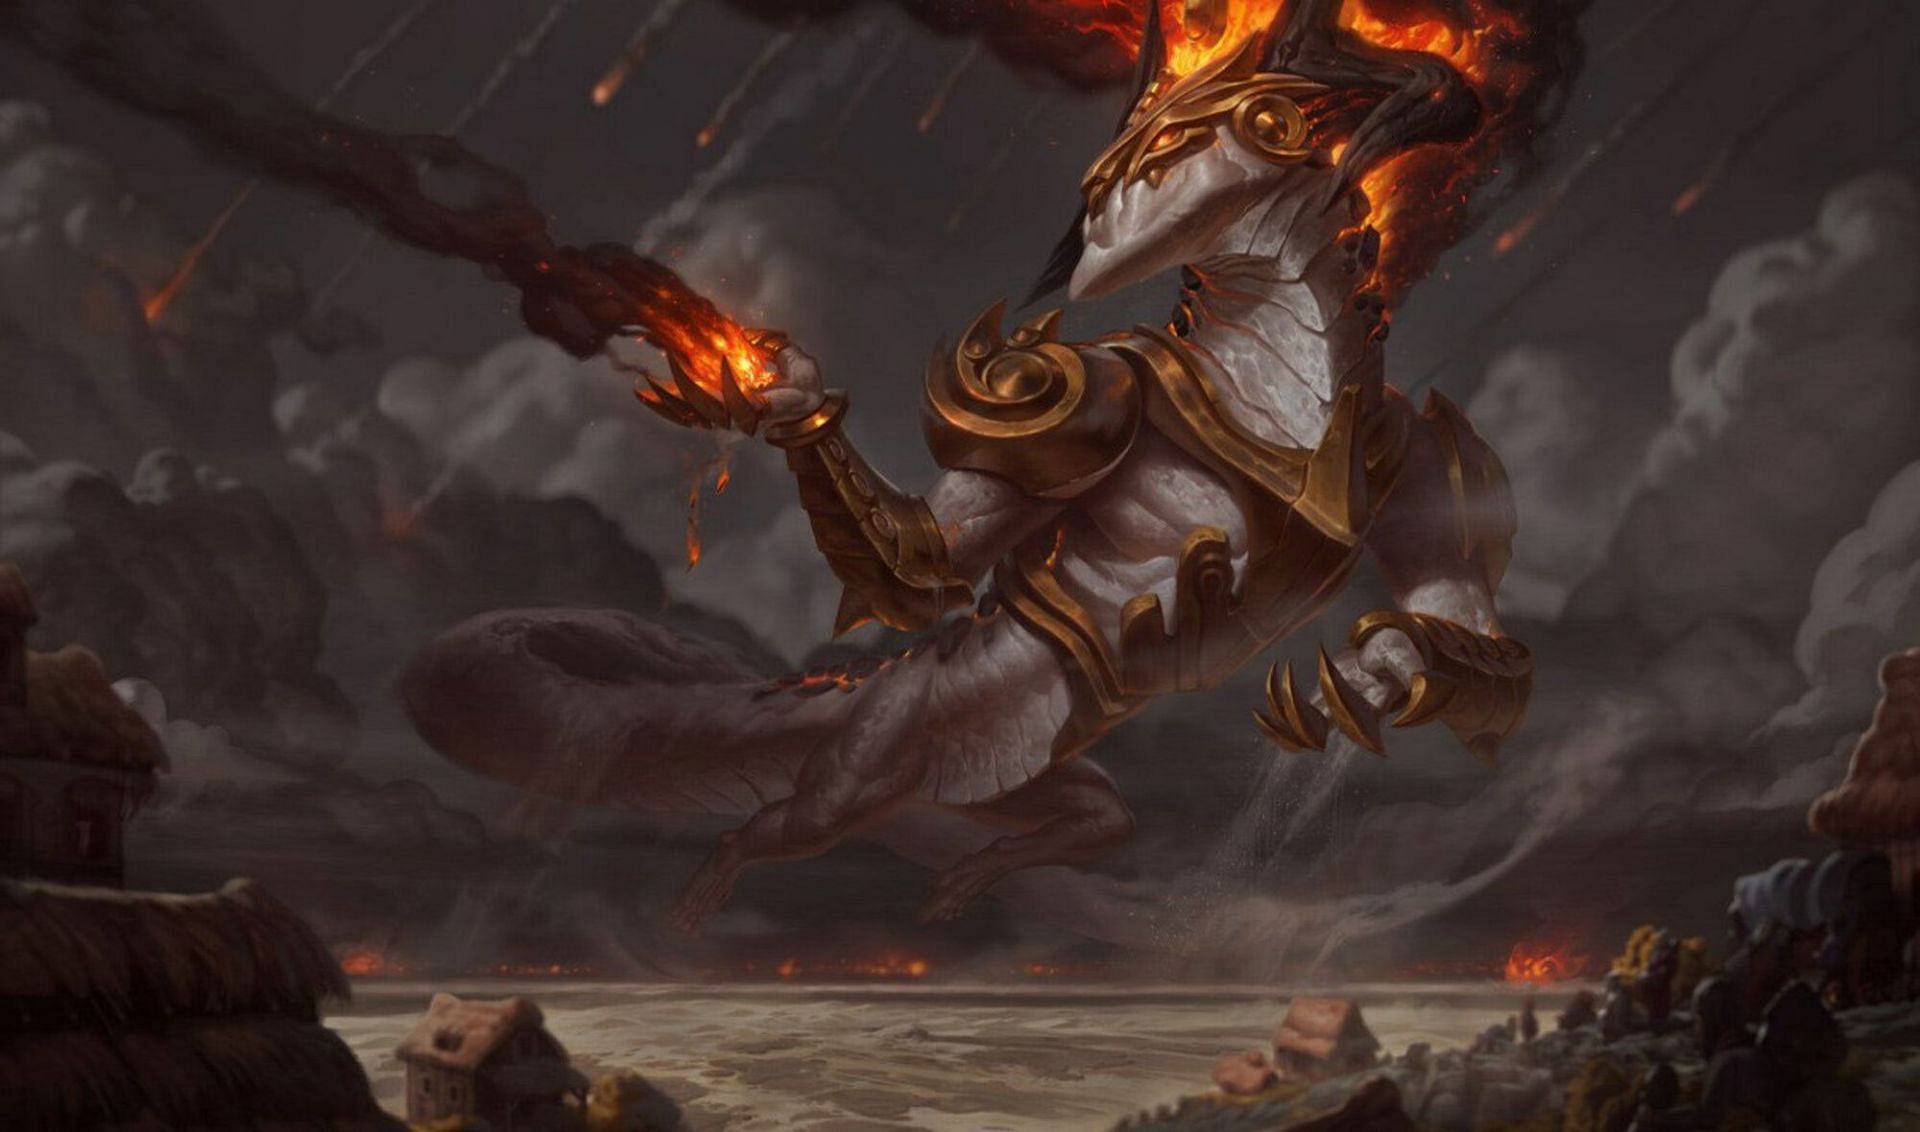 Rainmaker Games on X: Easter Egg Time! 🥚 Ao Shin was a dragon champion  concept that was eventually became Aurelion Sol. Before Aurelion Sol's  release, players spotted Ao Shin in the splash